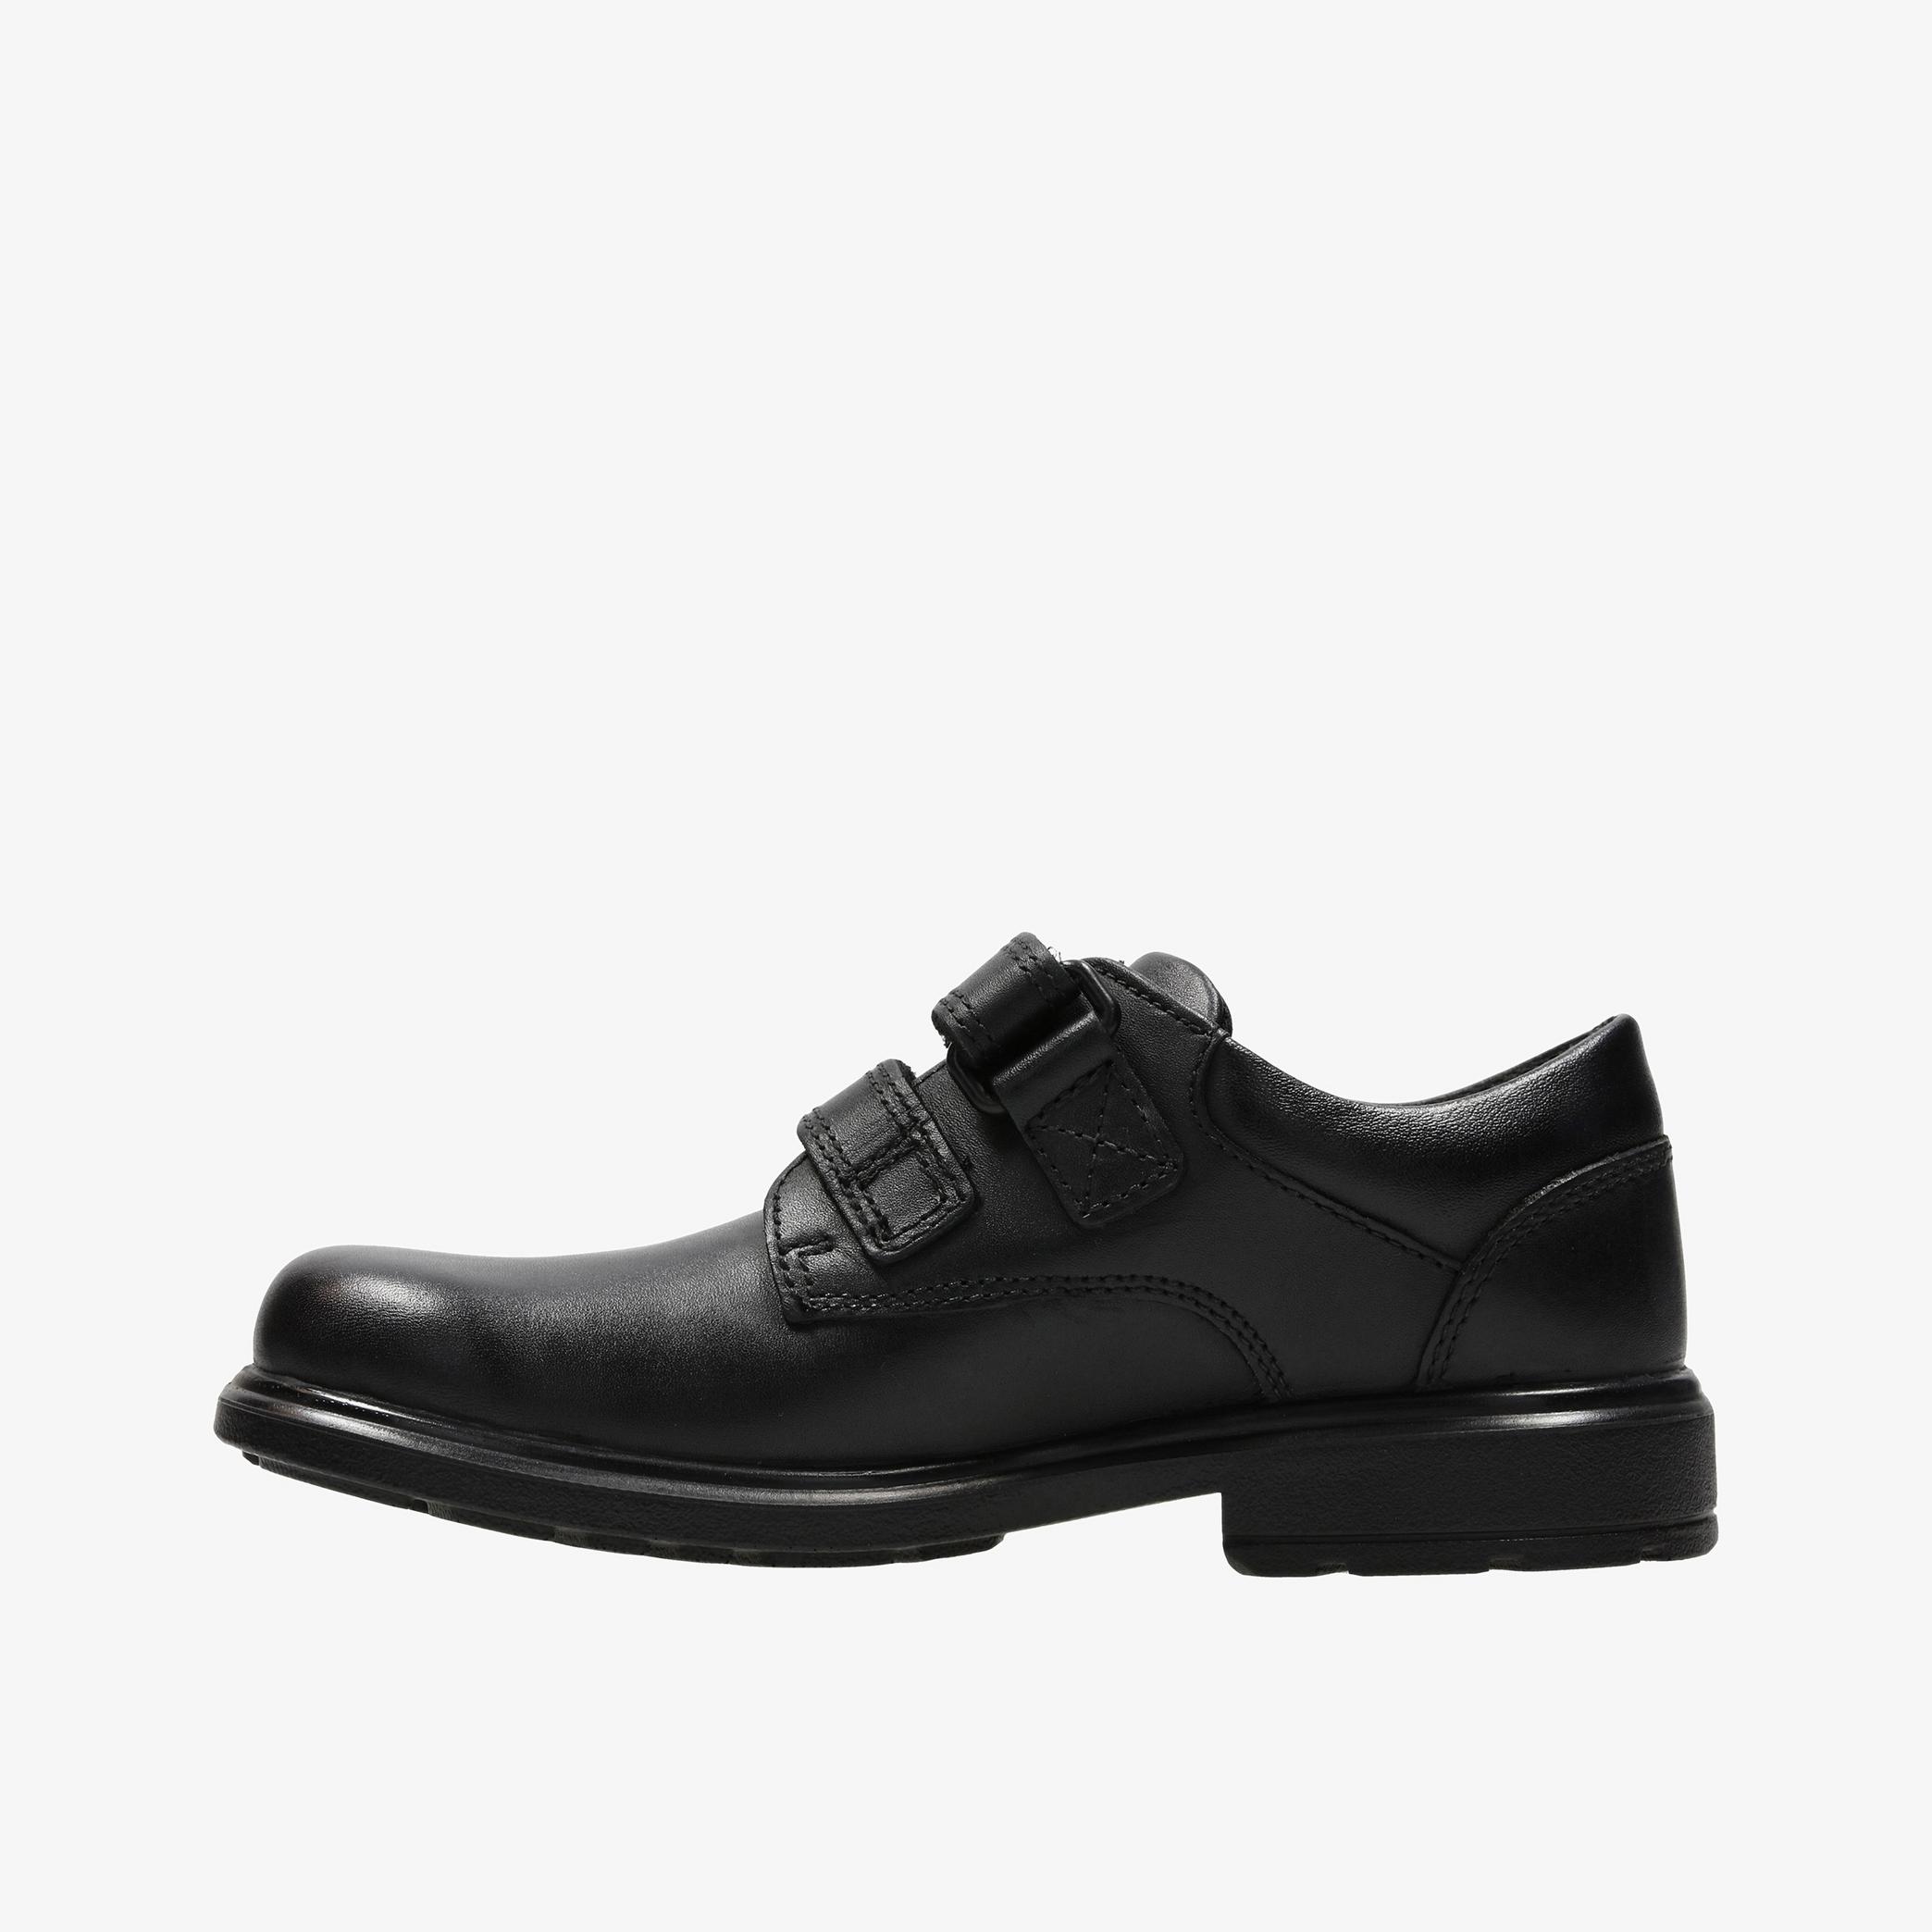 Remi Pace Kid Black Leather Shoes, view 2 of 6